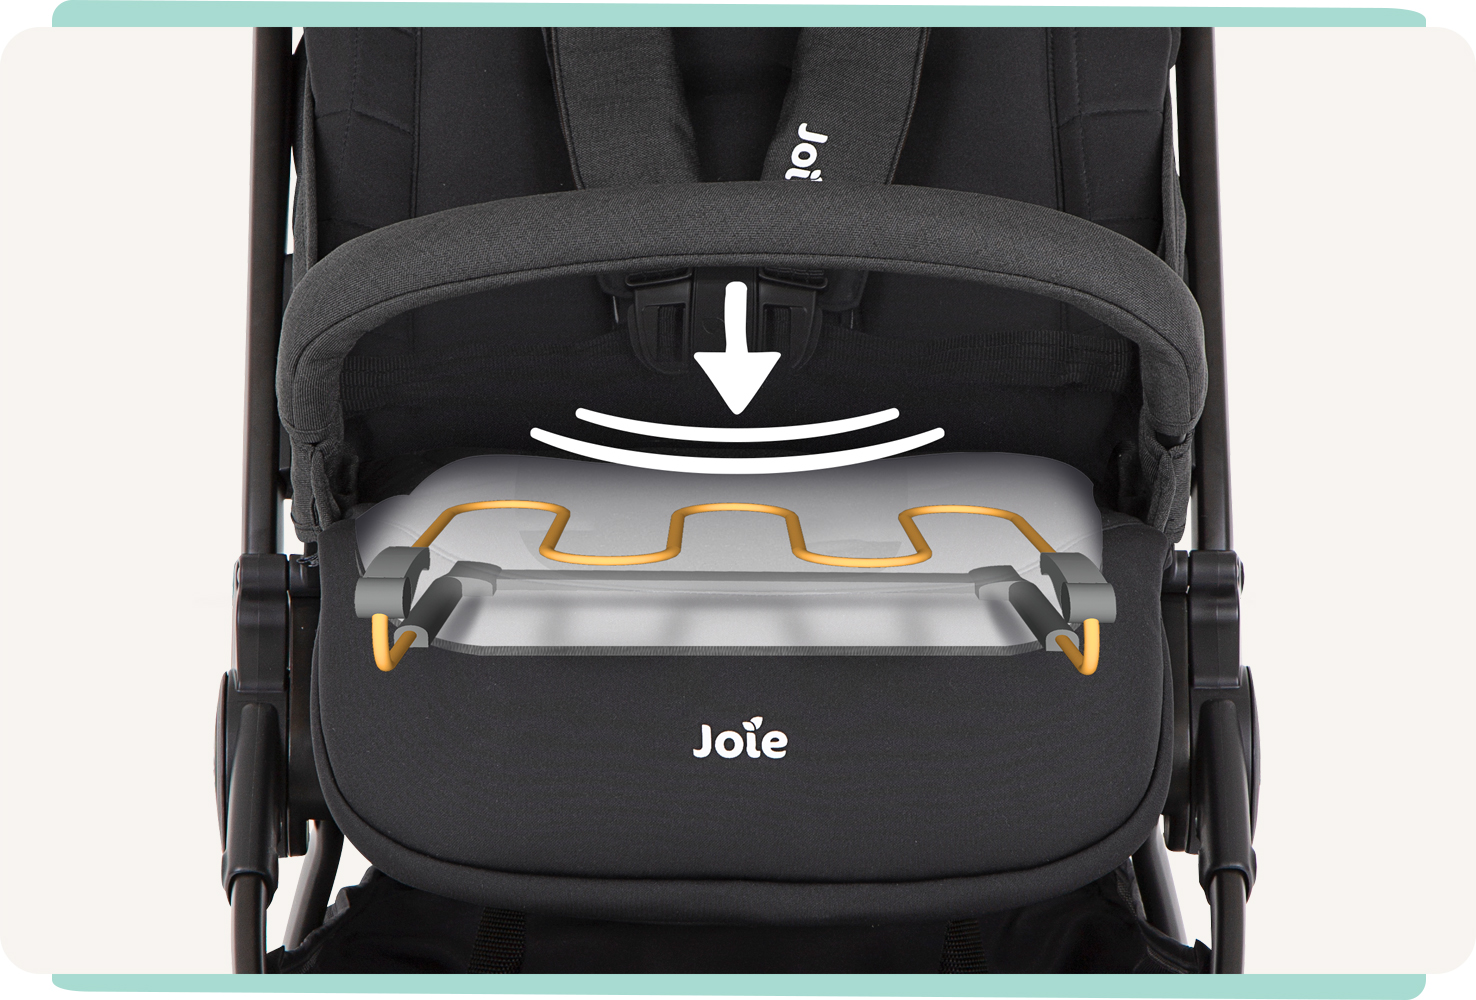 A closeup on the seat of a black Joie Pact FLex stroller with a cutaway showing the in seat suspension spring.